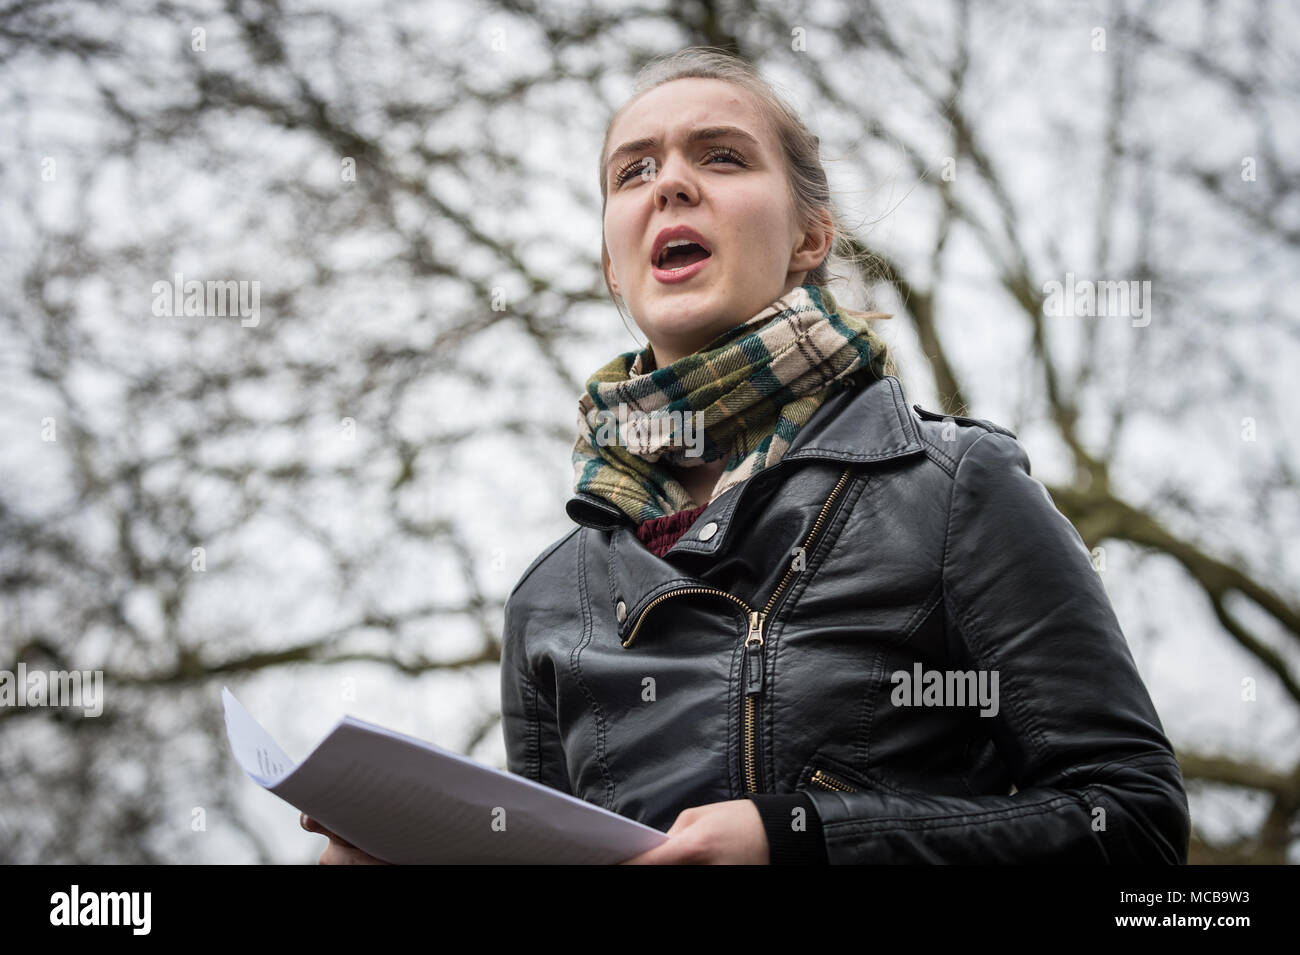 London, UK. 15th April, 2018. Nationalist members and supporters of the right-wing group Generation Identity gather in Hyde Park under heavy police supervision to hear a speech by a representative from the German women’s 120dB movement. Credit: Guy Corbishley/Alamy Live News Stock Photo